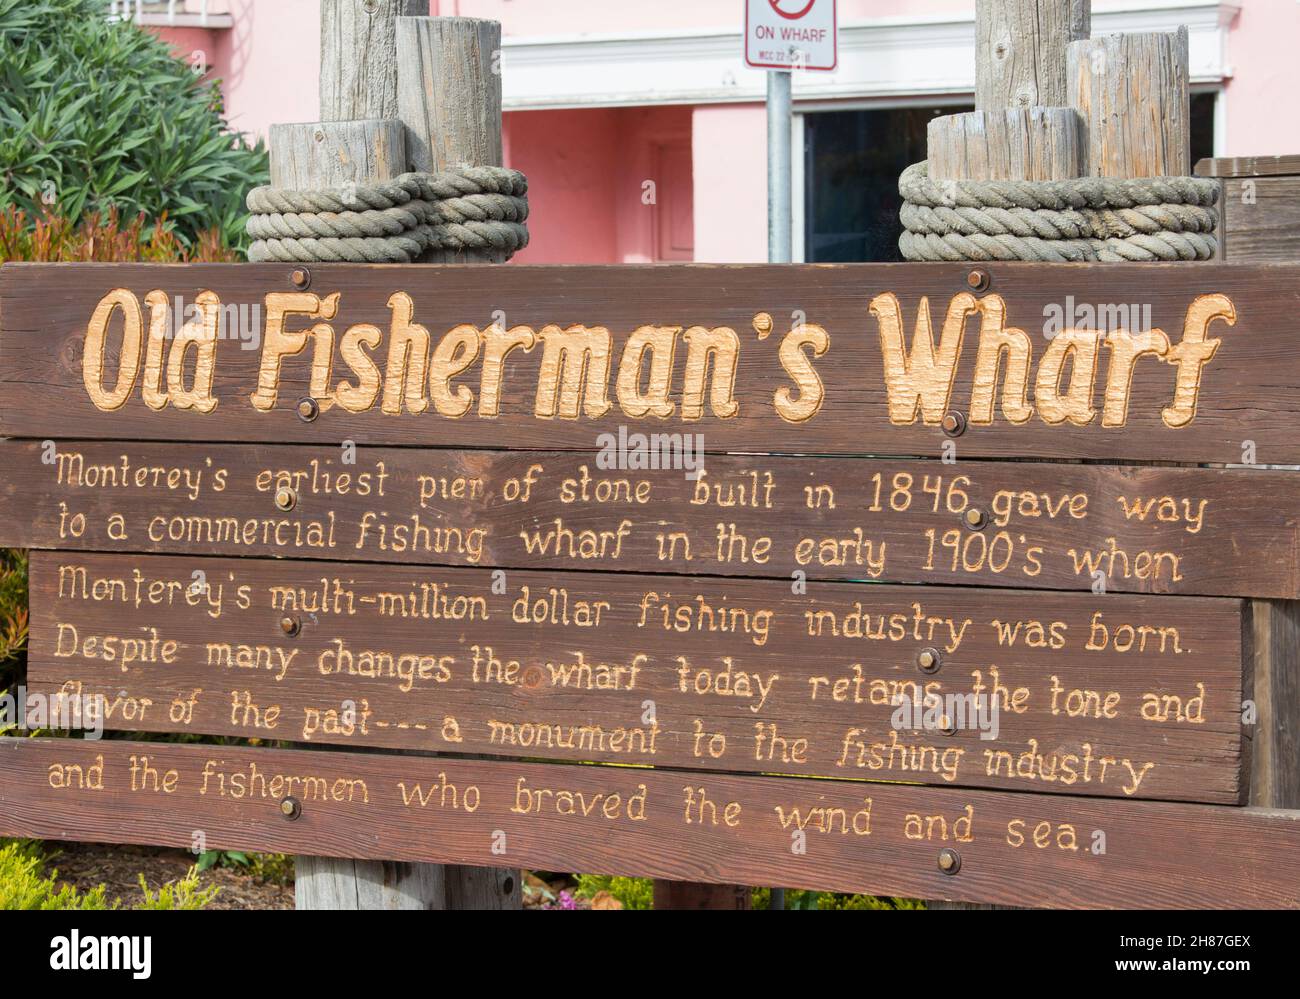 Monterey, California, USA. Simple wooden sign marking entrance to the historic Old Fisherman's Wharf. Stock Photo